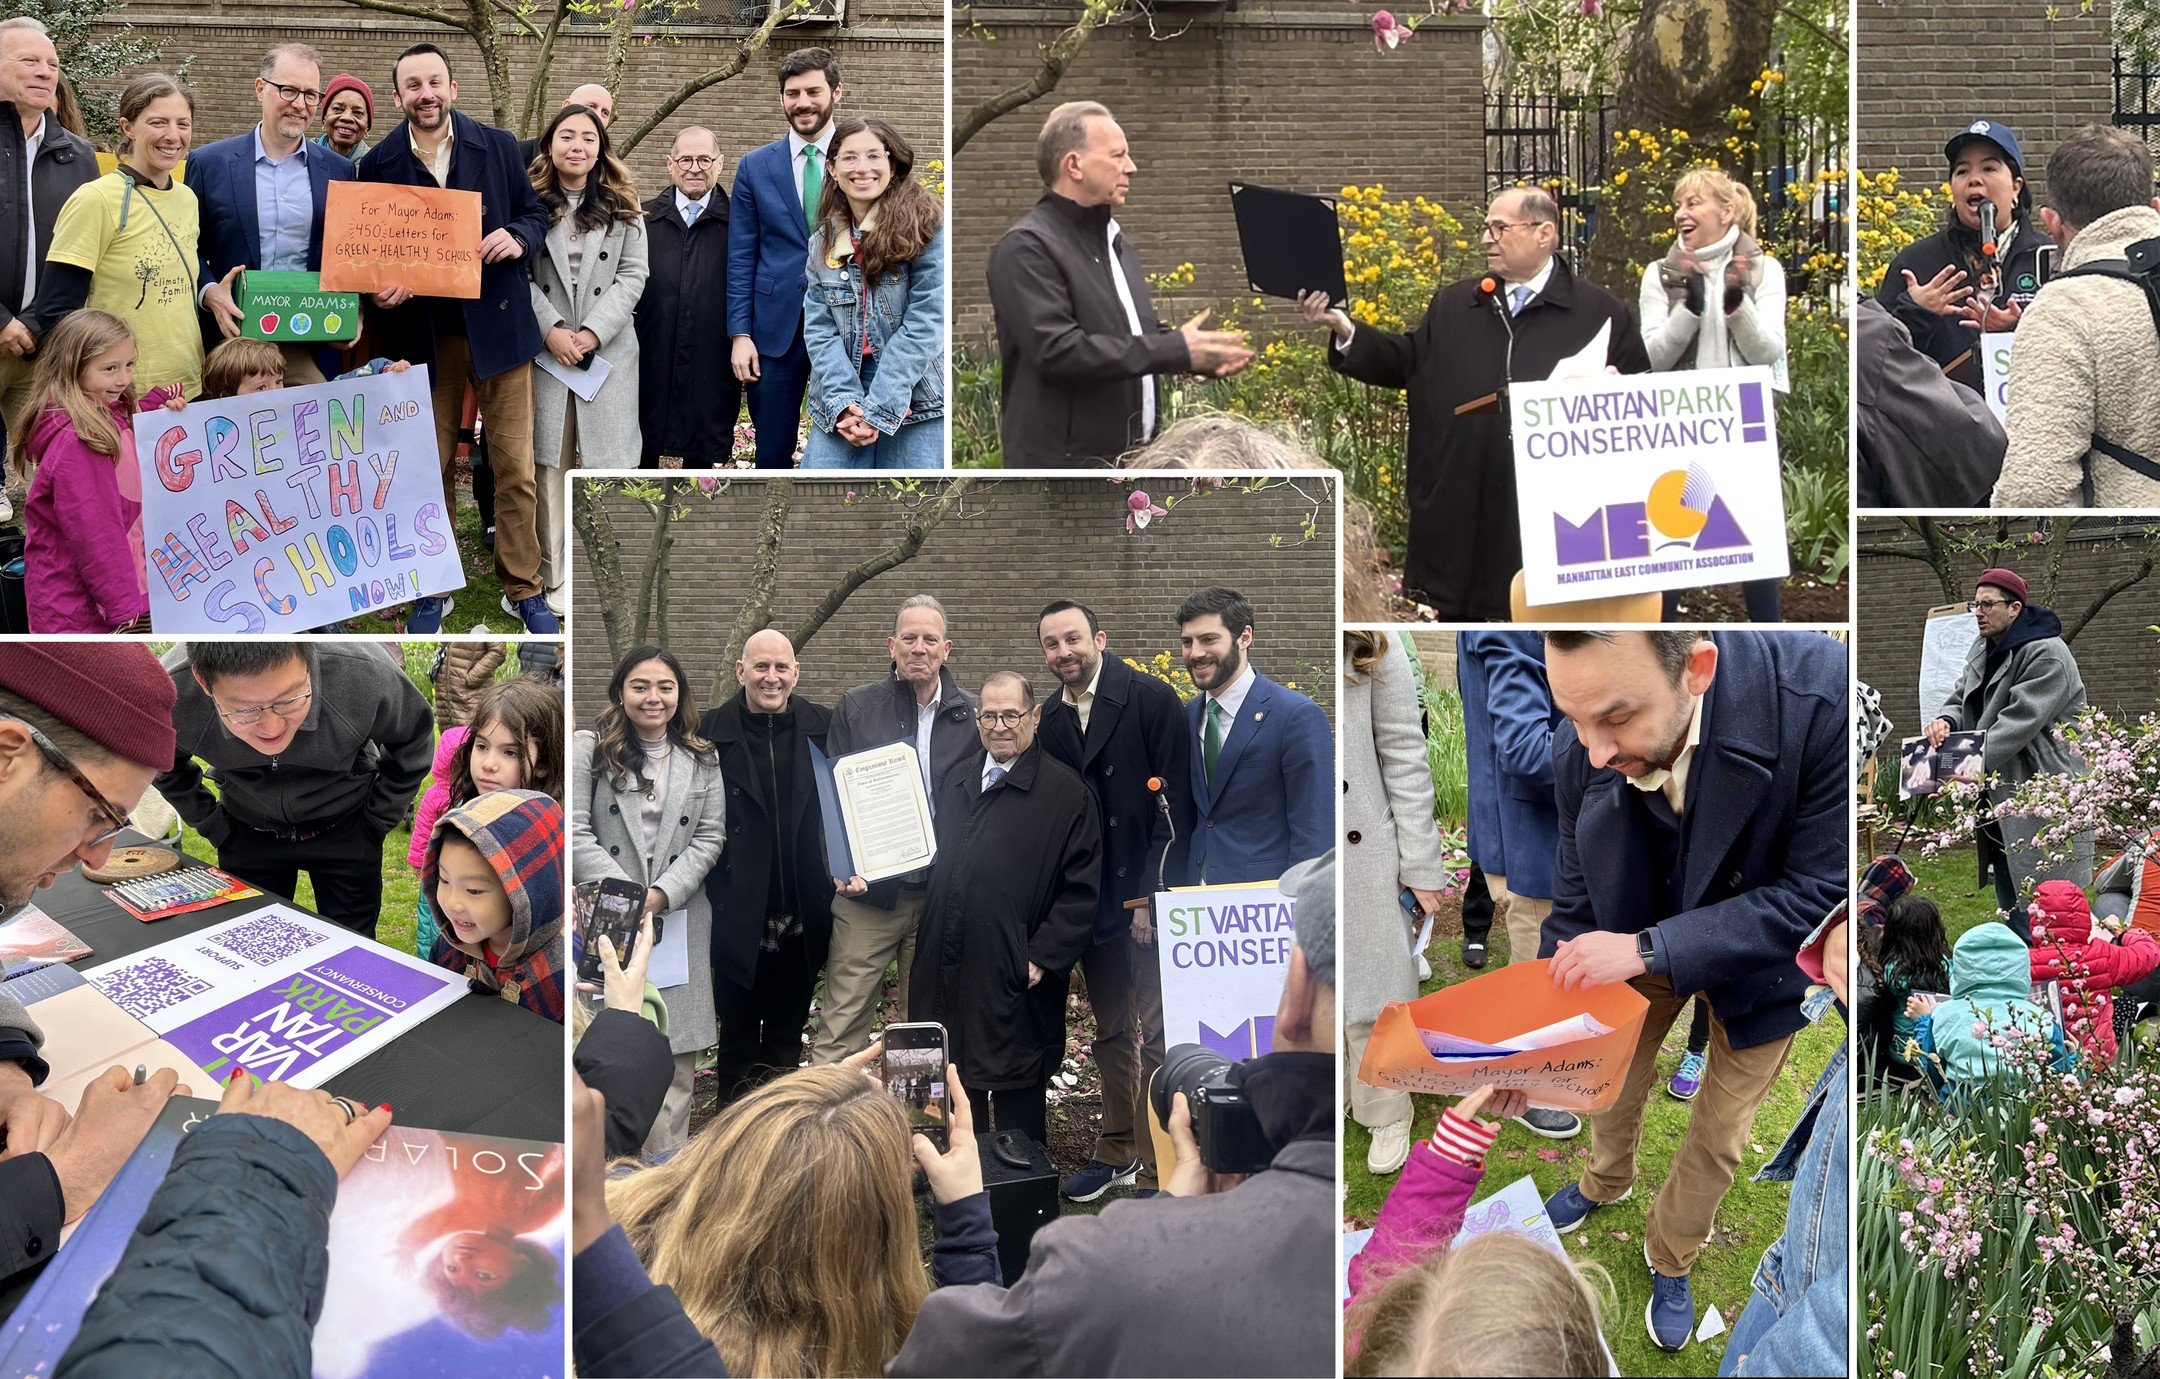 Today during the fourth annual St. Vartan Park Earth Celebration, several special guests stopped by the park garden stewarded by St Vartan Park Conservancy.

@repjerrynadler bestowed @stvartanpark president @okevinokeefe with a U.S. Congressional pro